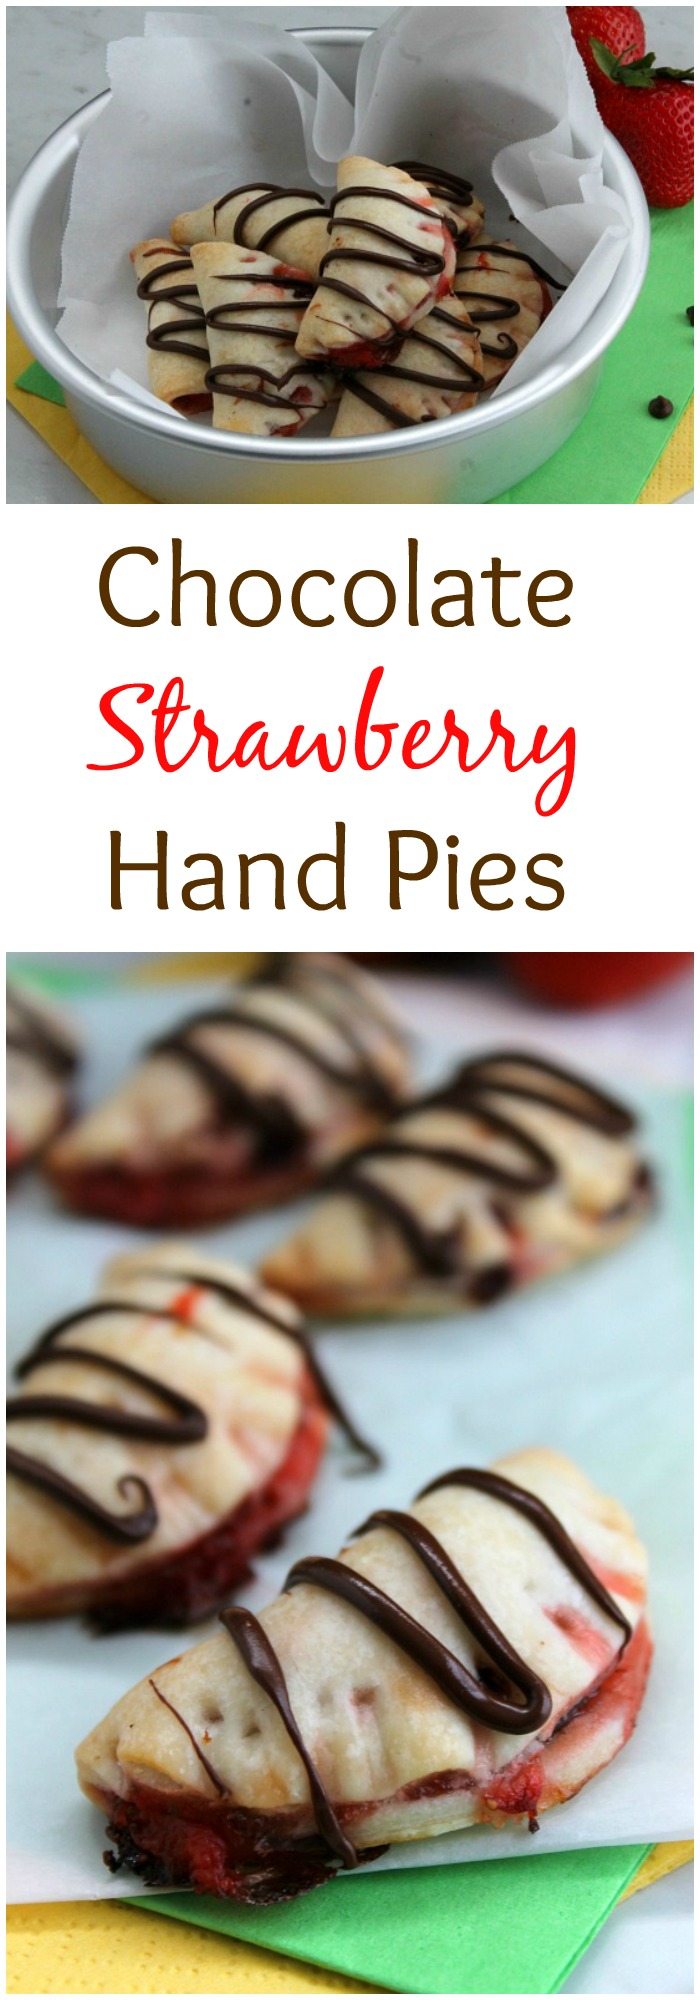 Chocolate Strawberry Hand Pies from The Bitter Side of Sweet